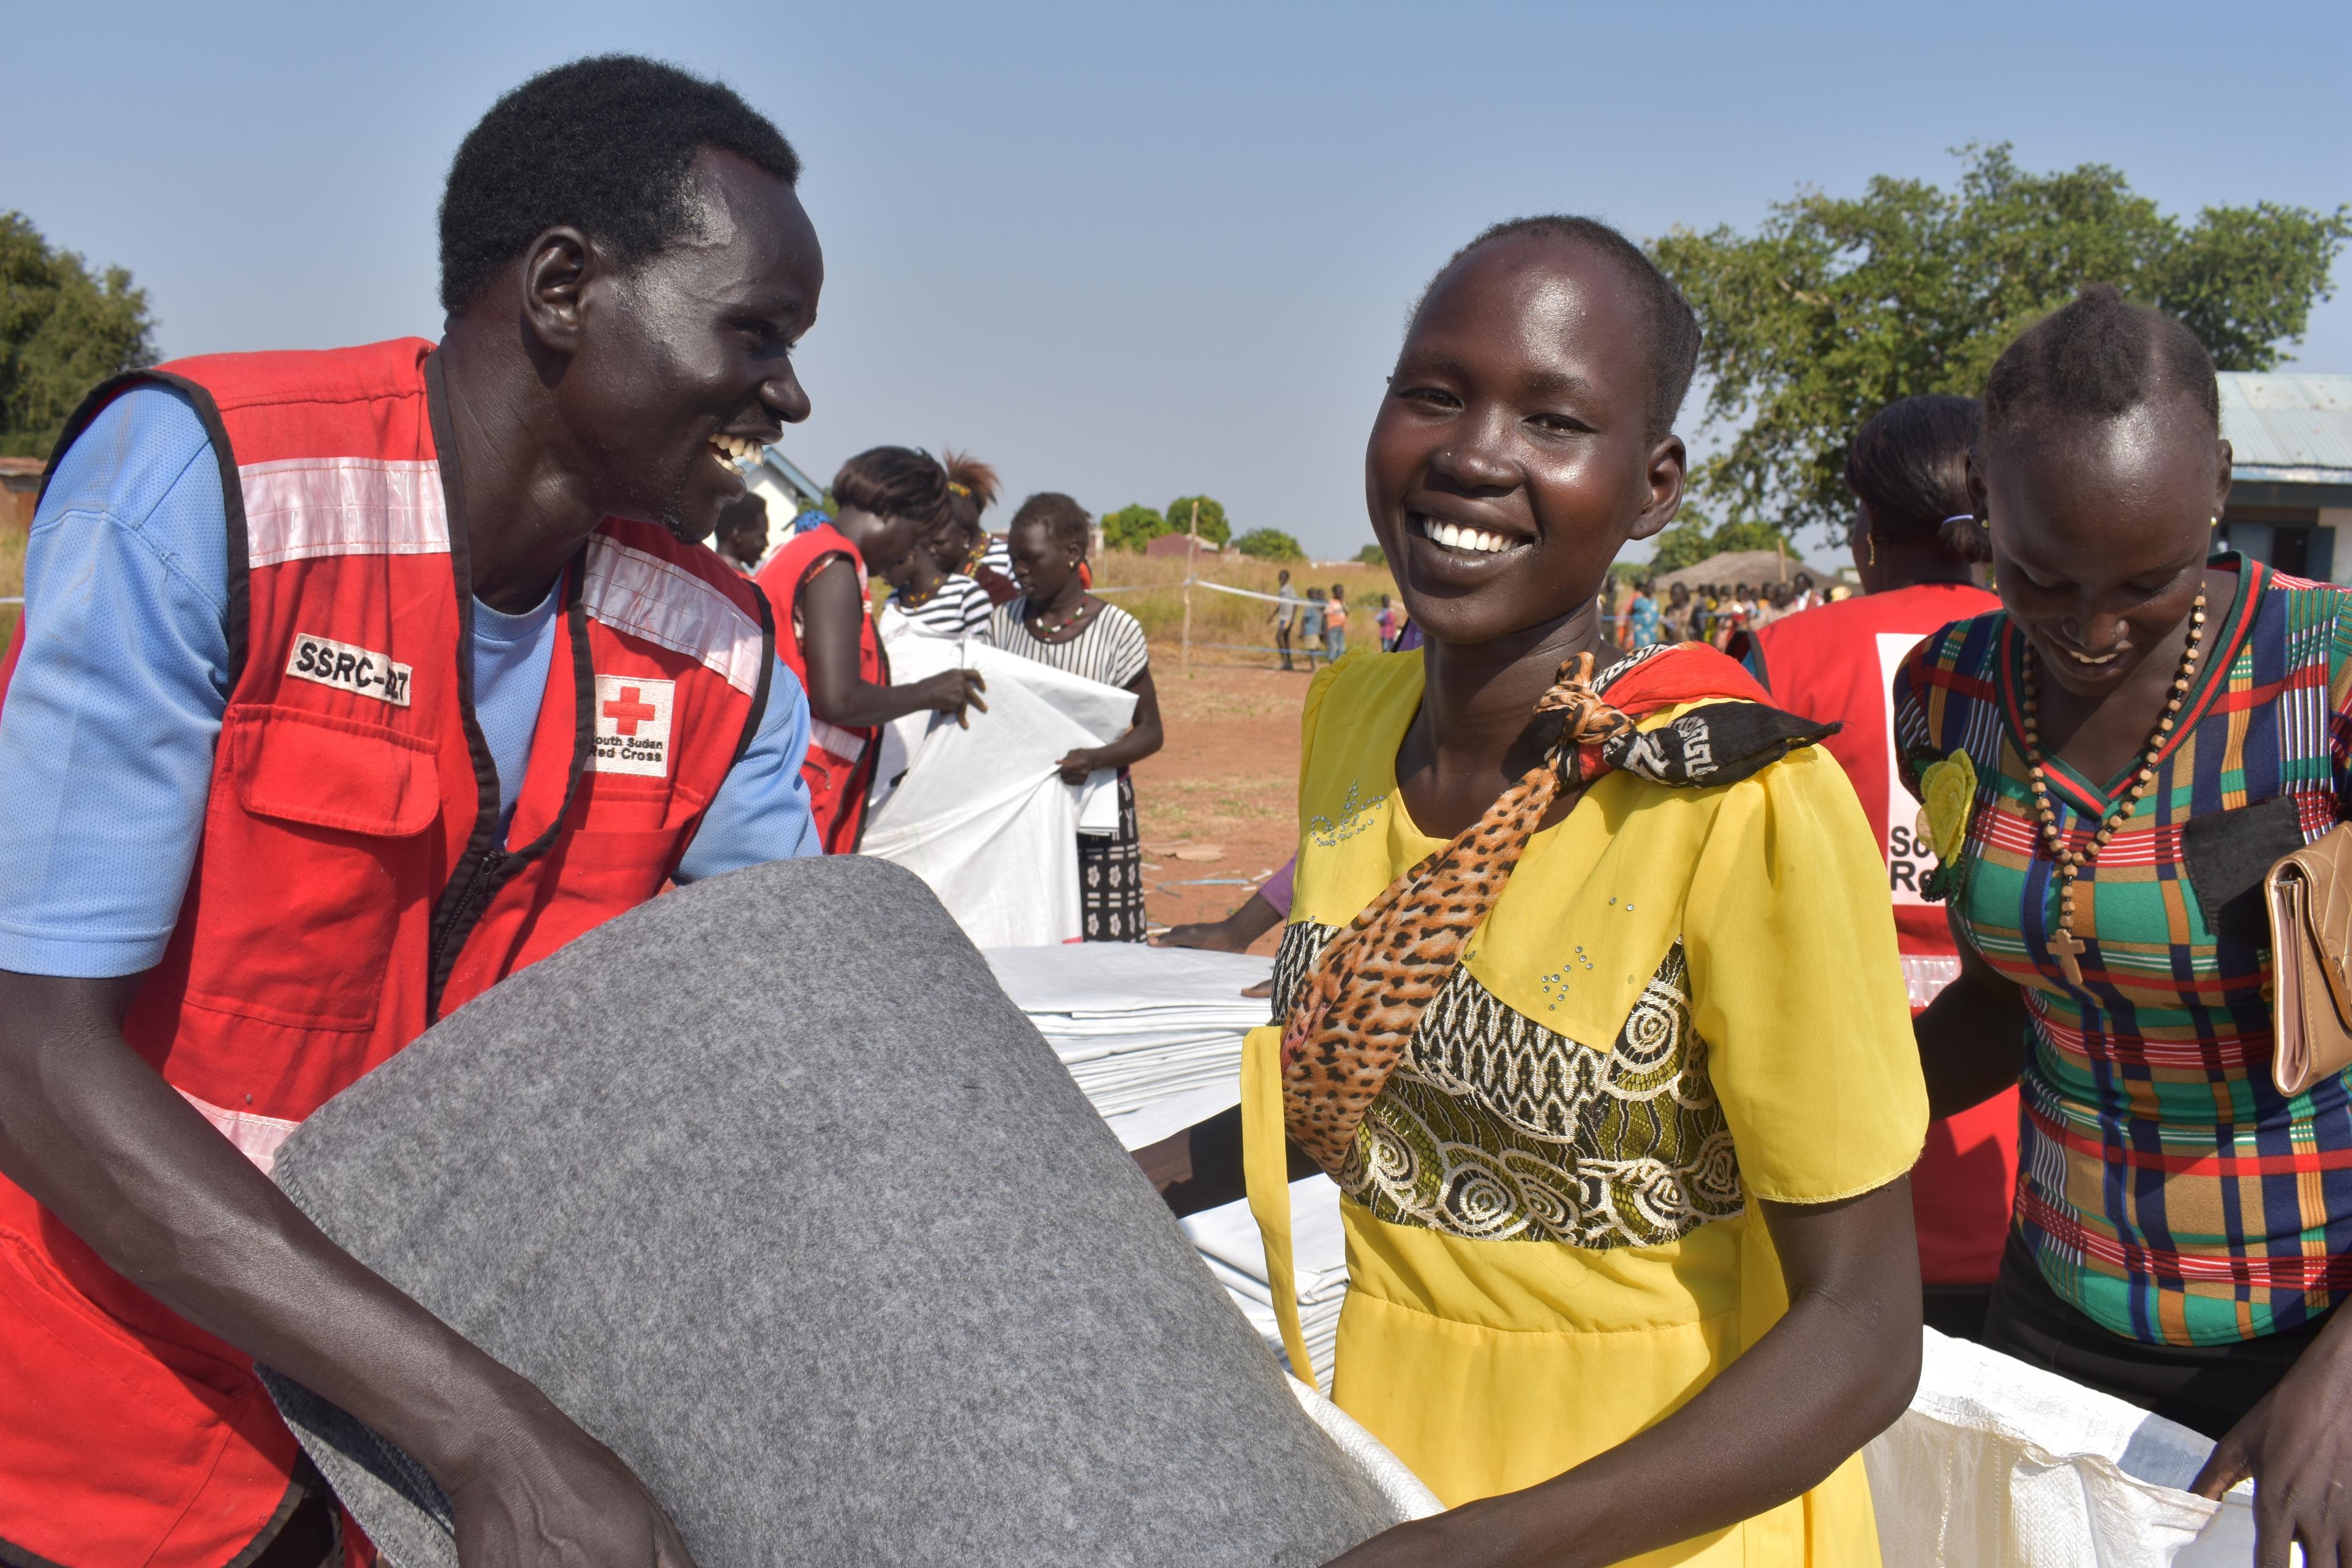 A man in a Red Cross vest smilingly hands over a blanket to a woman who also has a smile on her face. More such handovers take place in the background.  